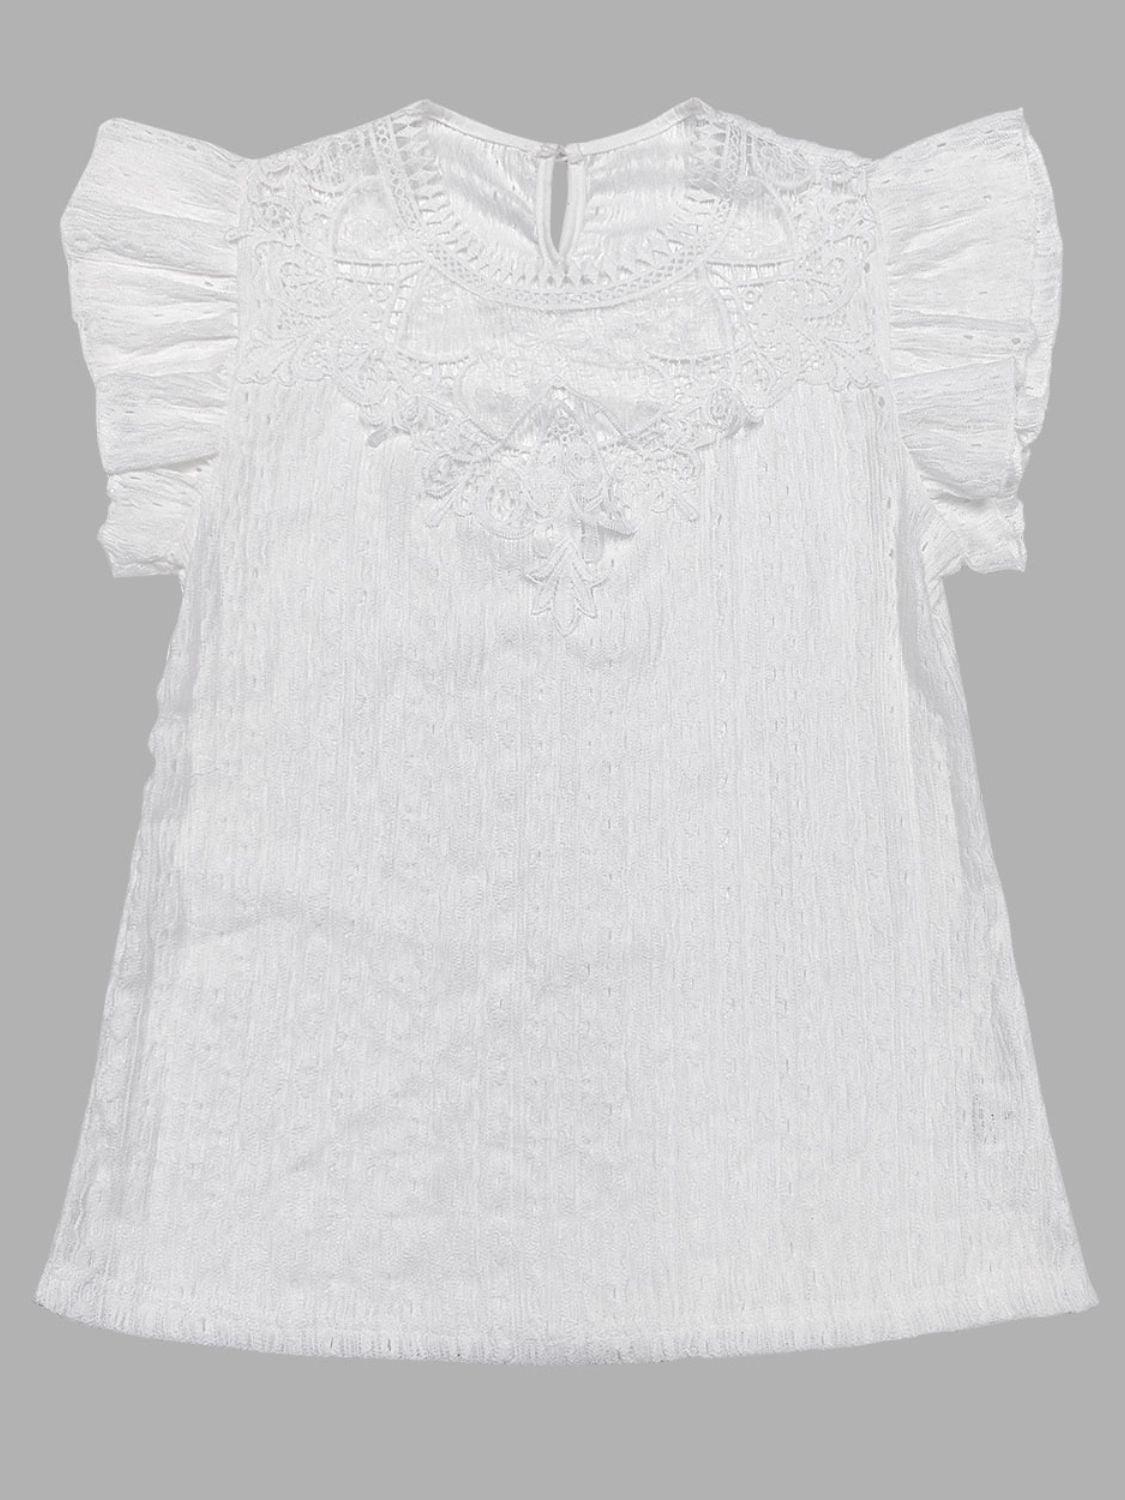 a white blouse with a frilled neckline